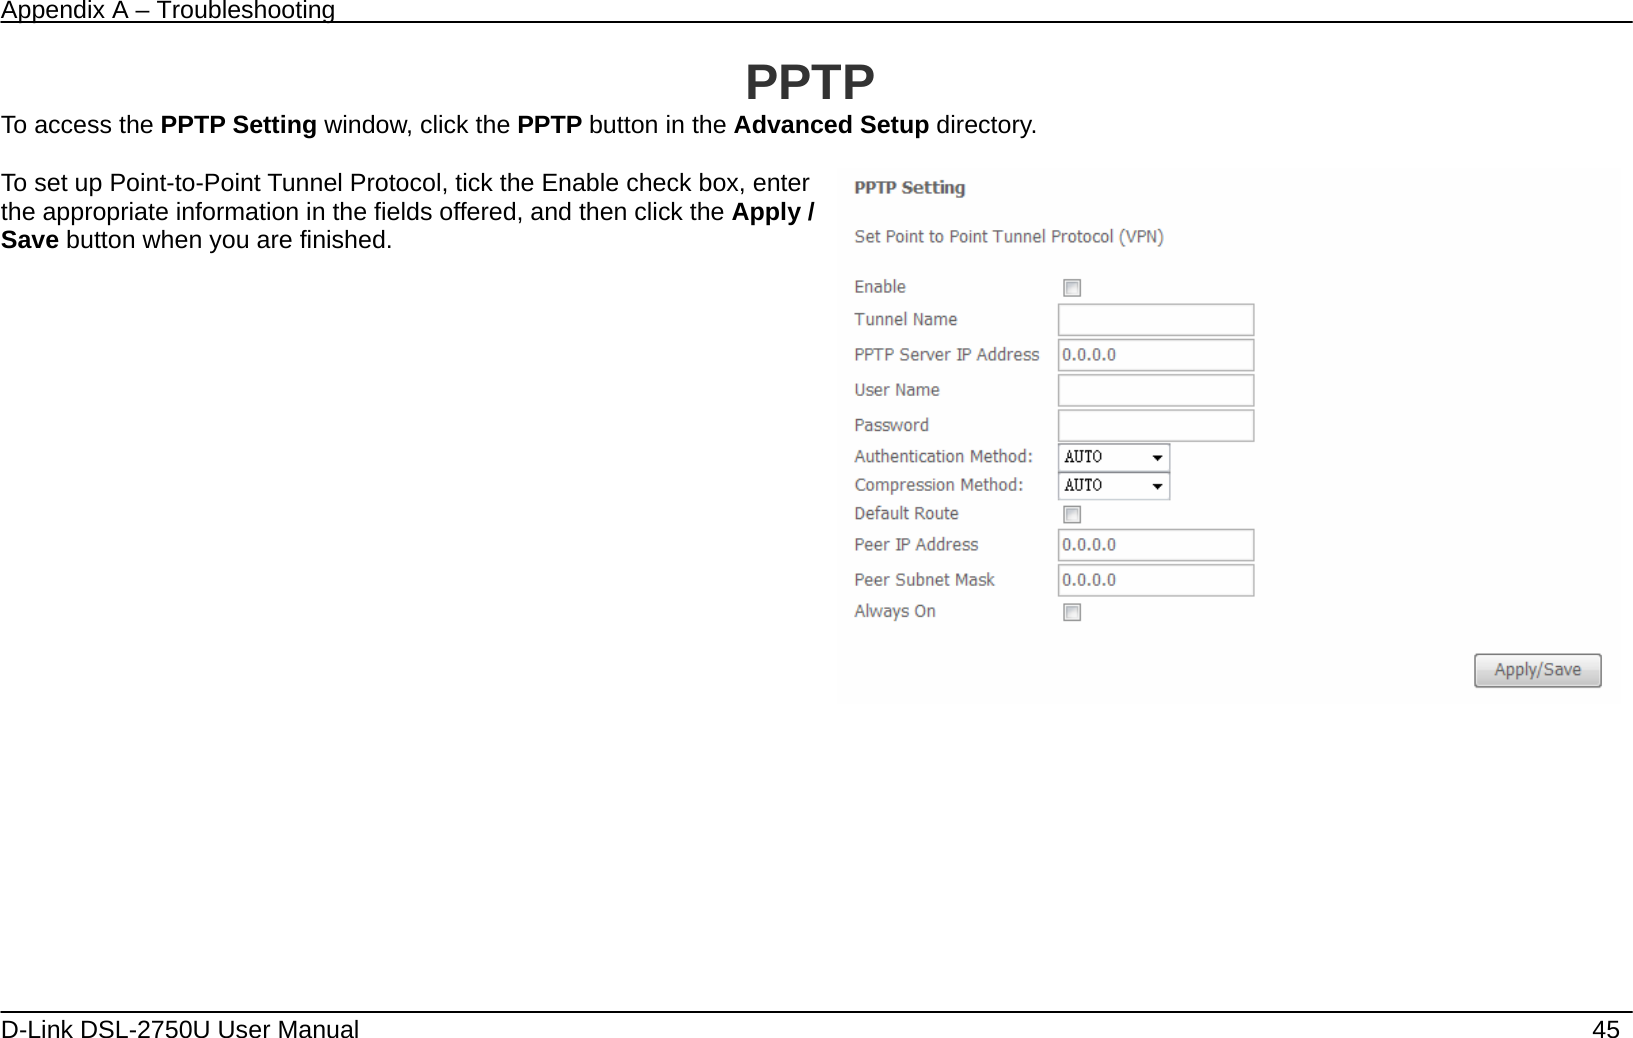 Appendix A – Troubleshooting   D-Link DSL-2750U User Manual    45 PPTP To access the PPTP Setting window, click the PPTP button in the Advanced Setup directory.  To set up Point-to-Point Tunnel Protocol, tick the Enable check box, enter the appropriate information in the fields offered, and then click the Apply / Save button when you are finished.        